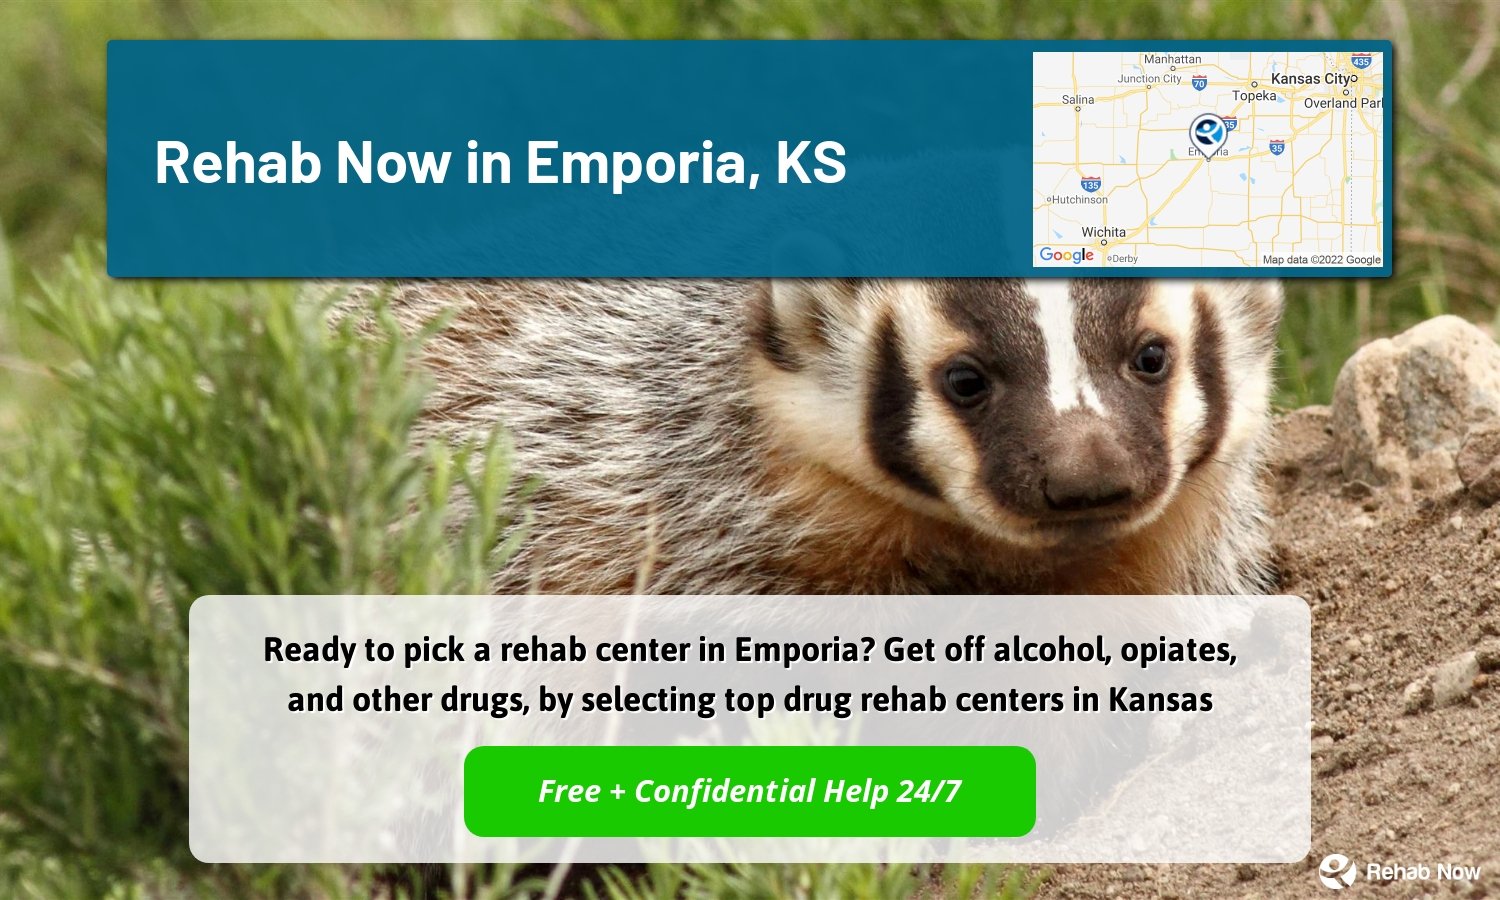 Ready to pick a rehab center in Emporia? Get off alcohol, opiates, and other drugs, by selecting top drug rehab centers in Kansas